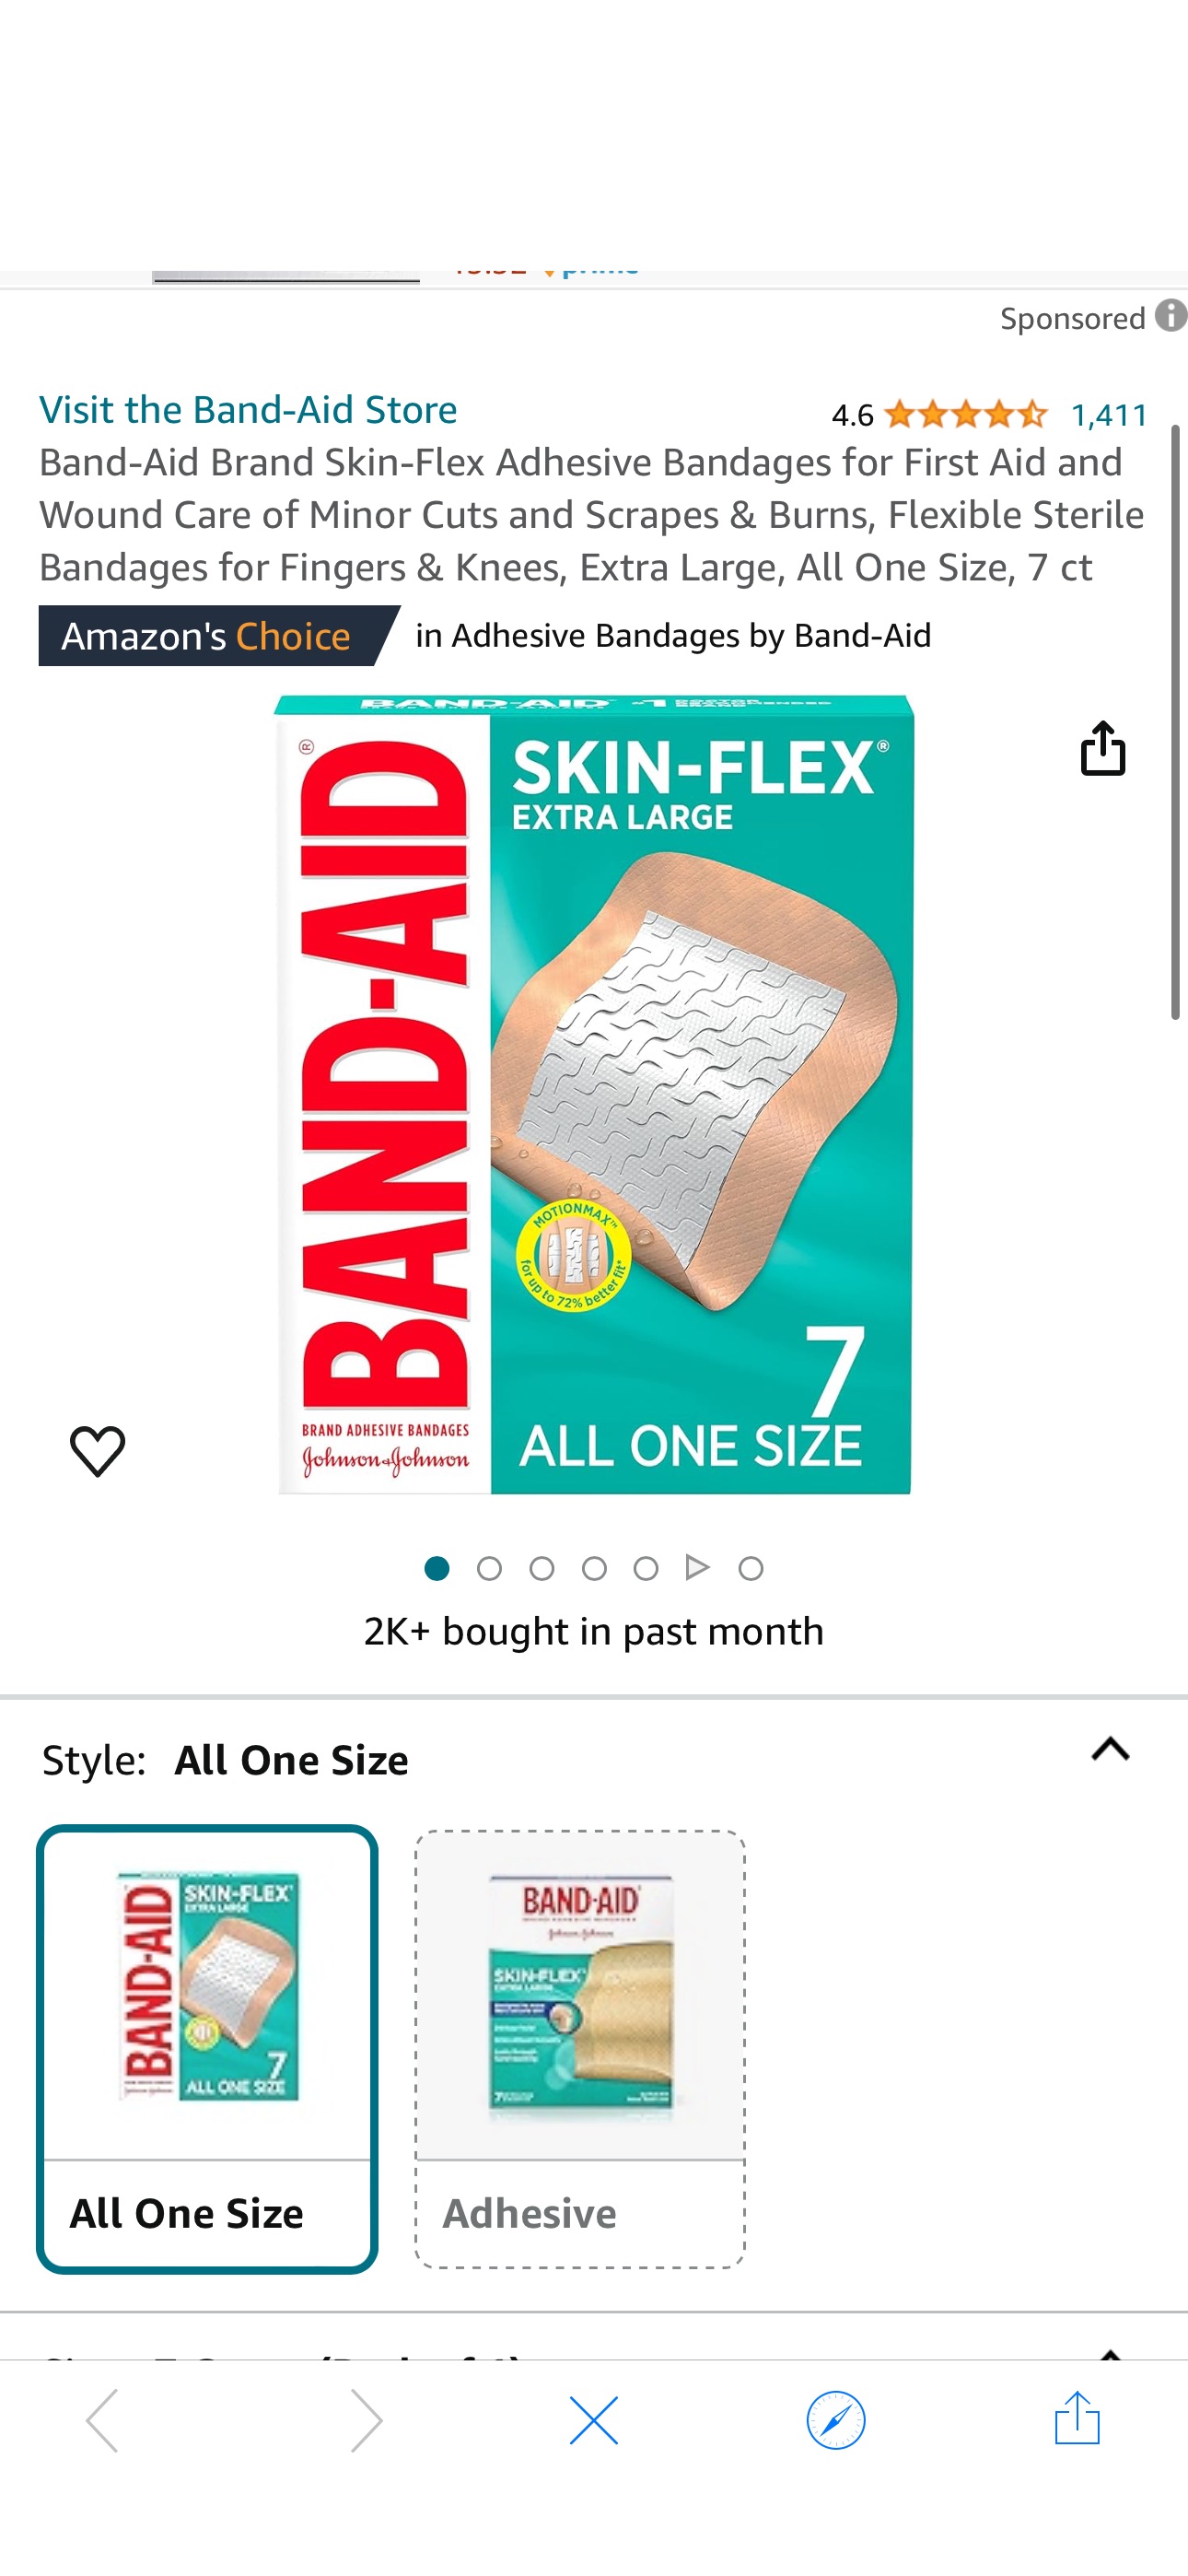 Amazon.com: Band-Aid Brand Skin-Flex Adhesive Bandages for First Aid and Wound Care of Minor Cuts and Scrapes & Burns, Flexible Sterile Bandages for Fingers & Knees, Extra Large, All One Size, 7 ct : 